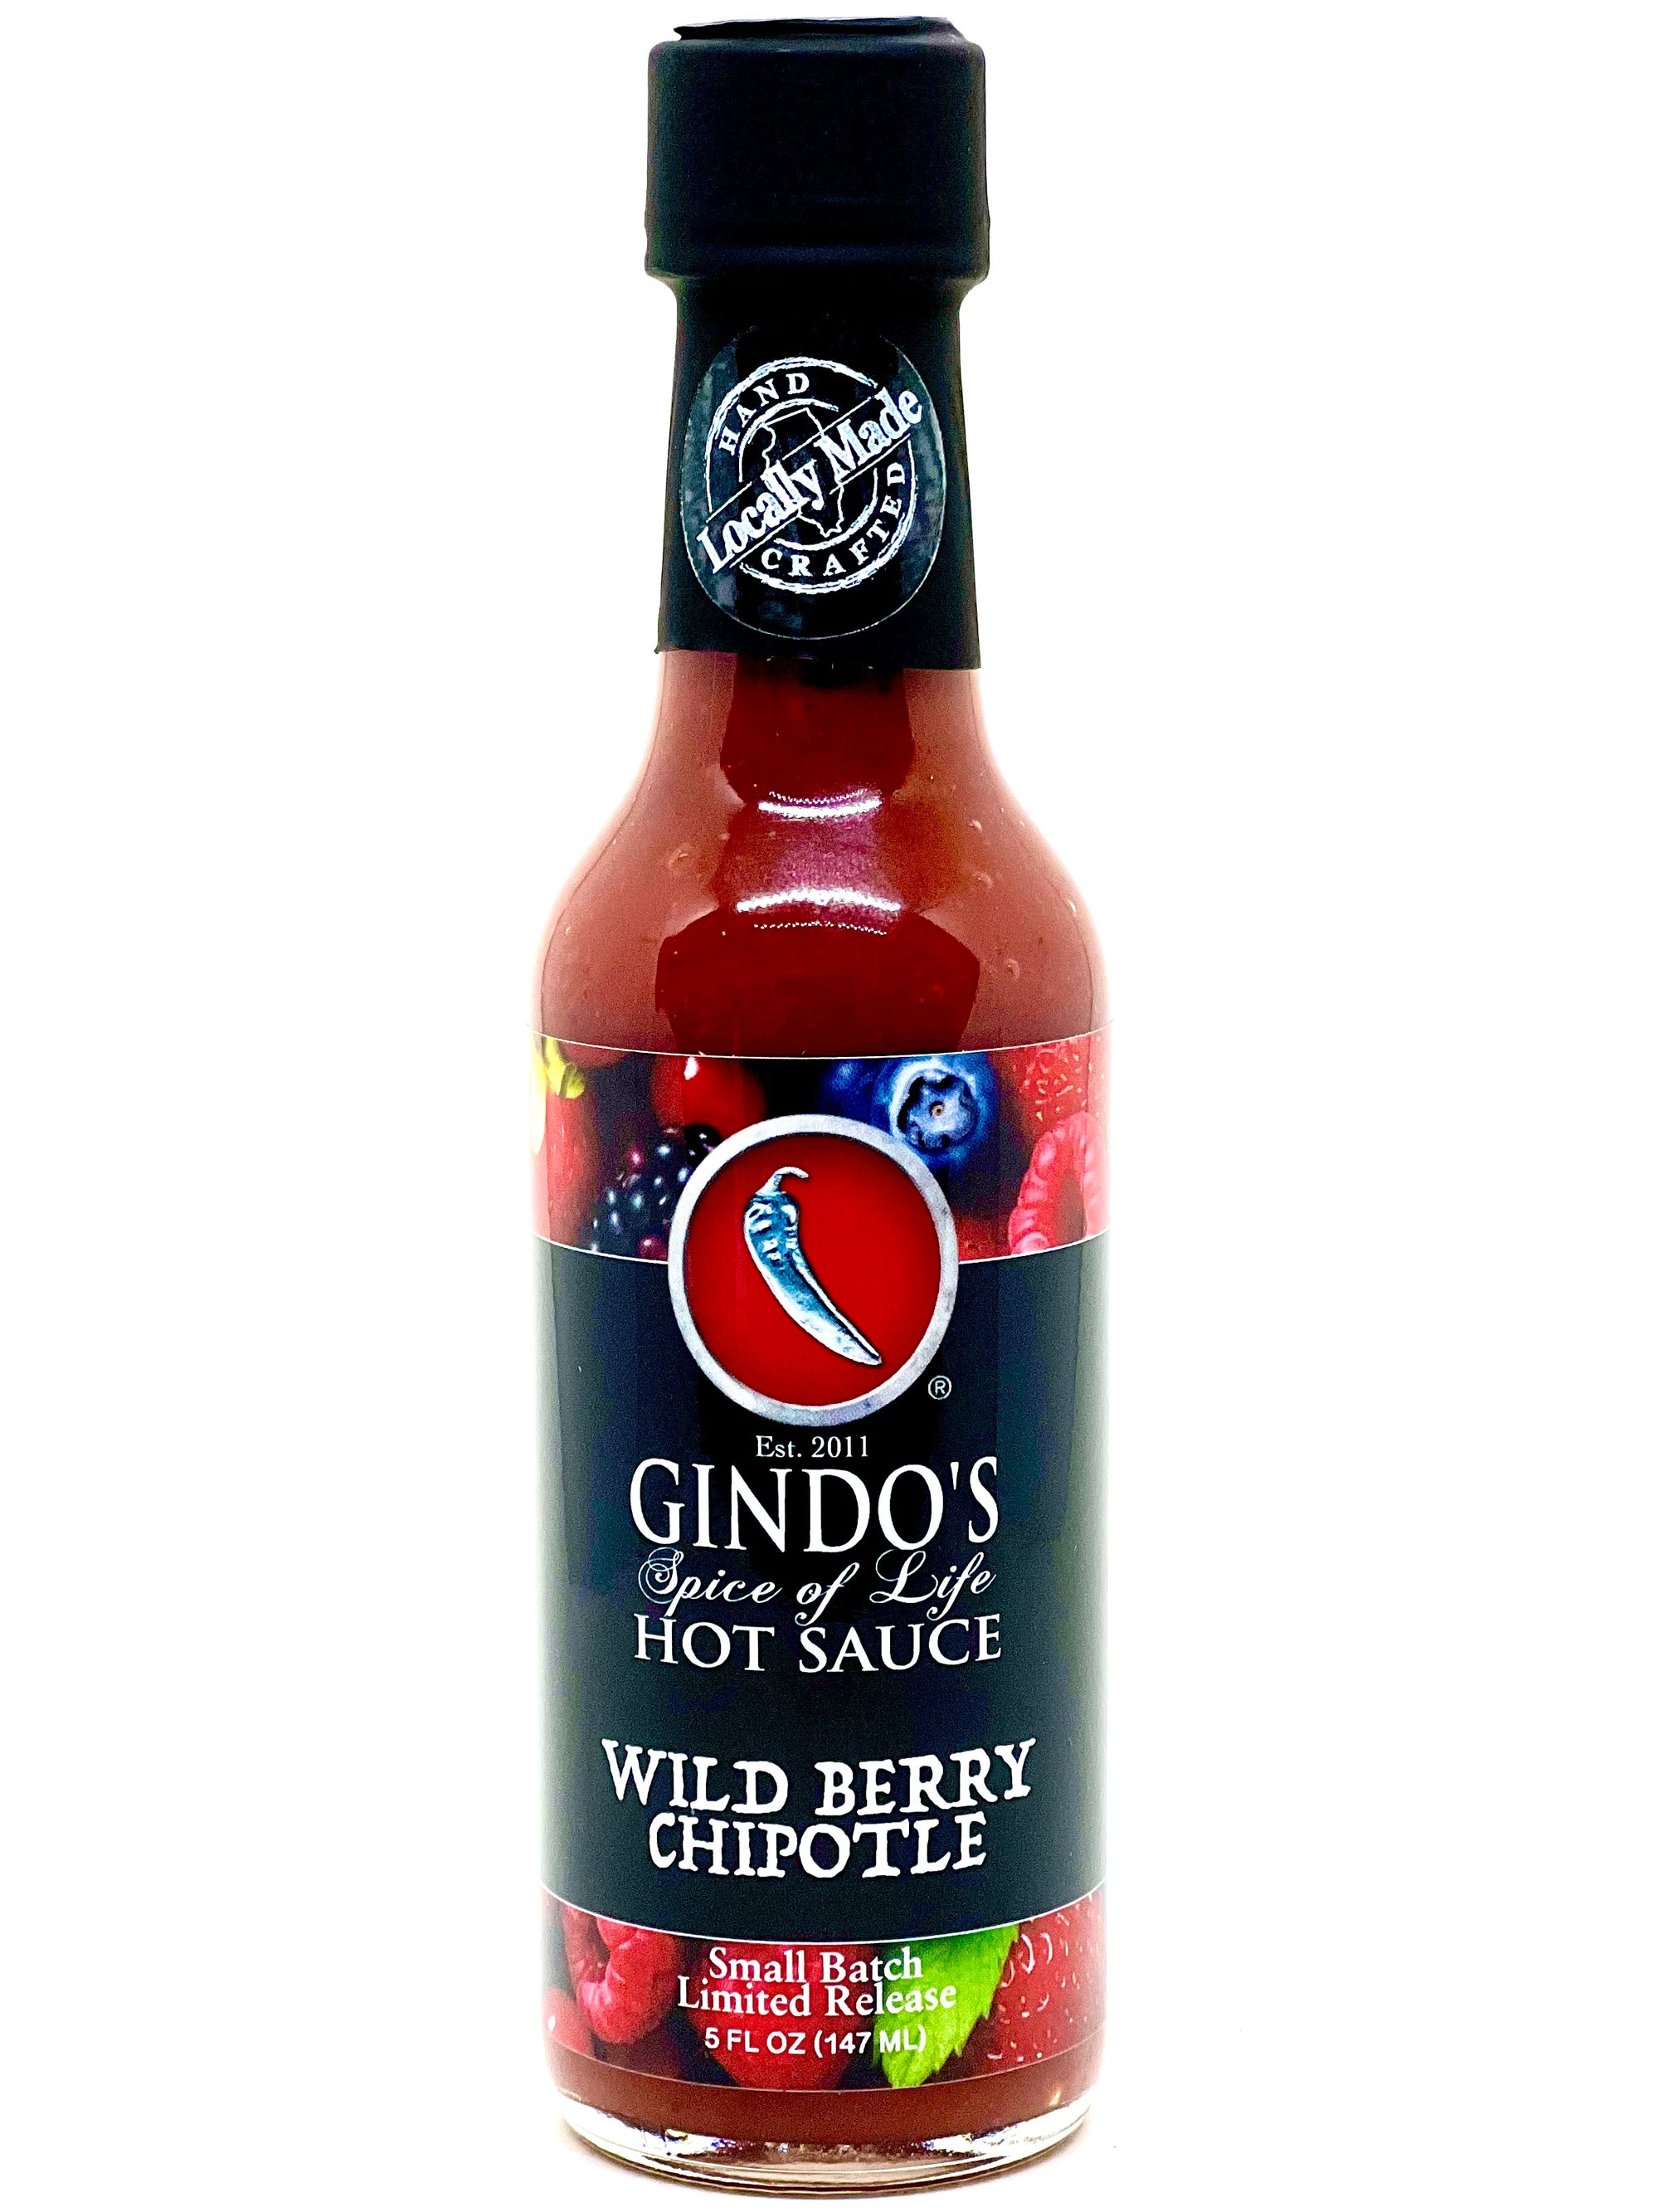 Wild Berry Chipotle Hot Sauce